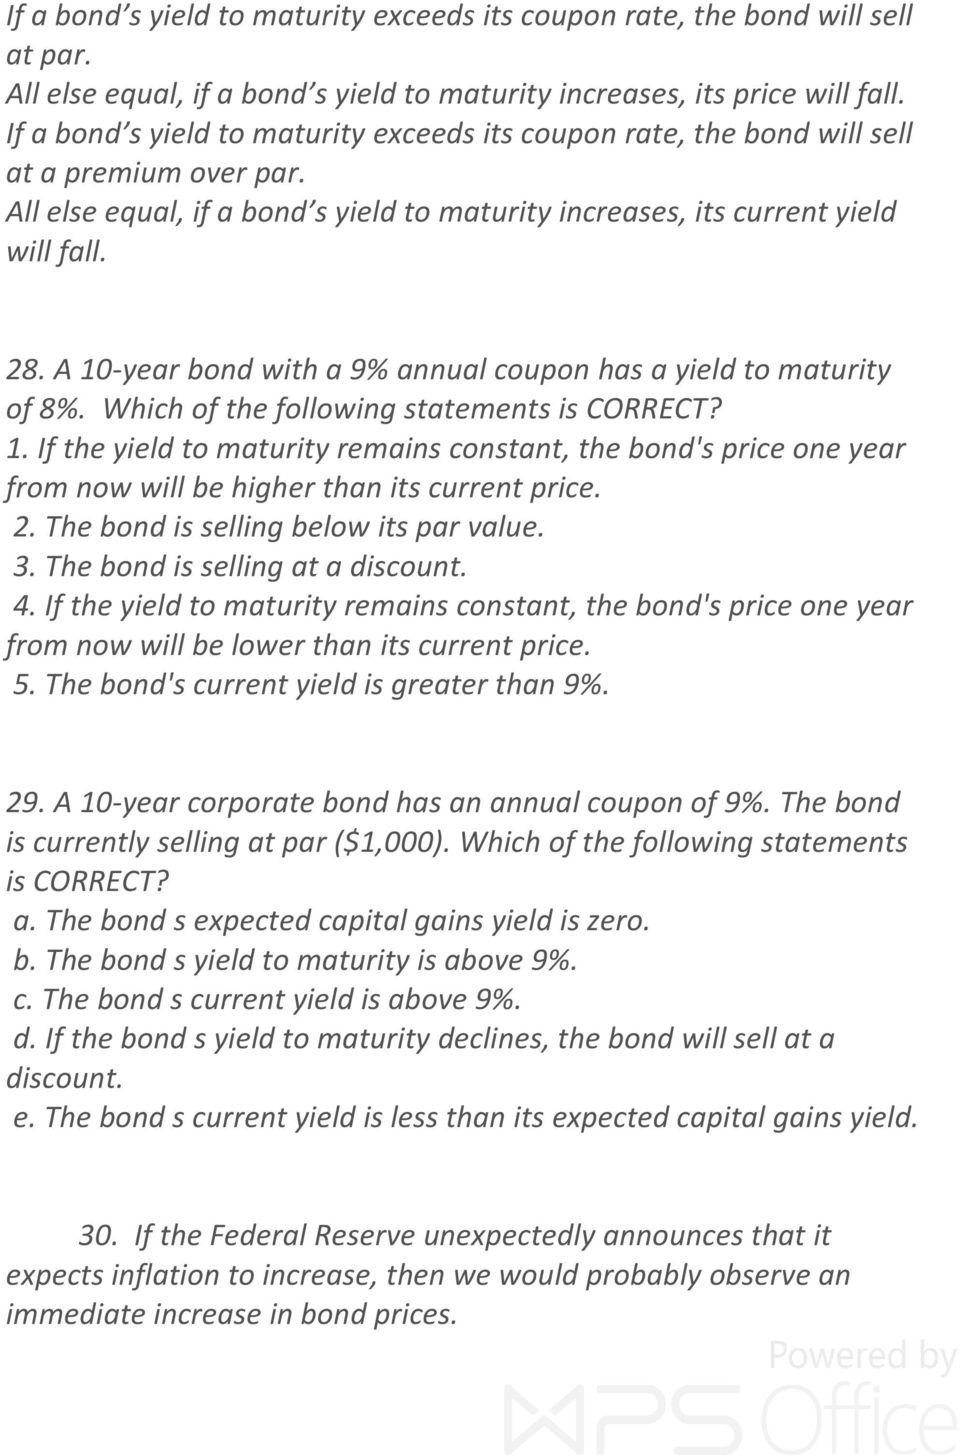 A 10-year bond with a 9% annual coupon has a yield to maturity of 8%. Which of the following statements is CORRECT? 1. If the yield to maturity remains constant, the bond's price one year from now will be higher than its current price.